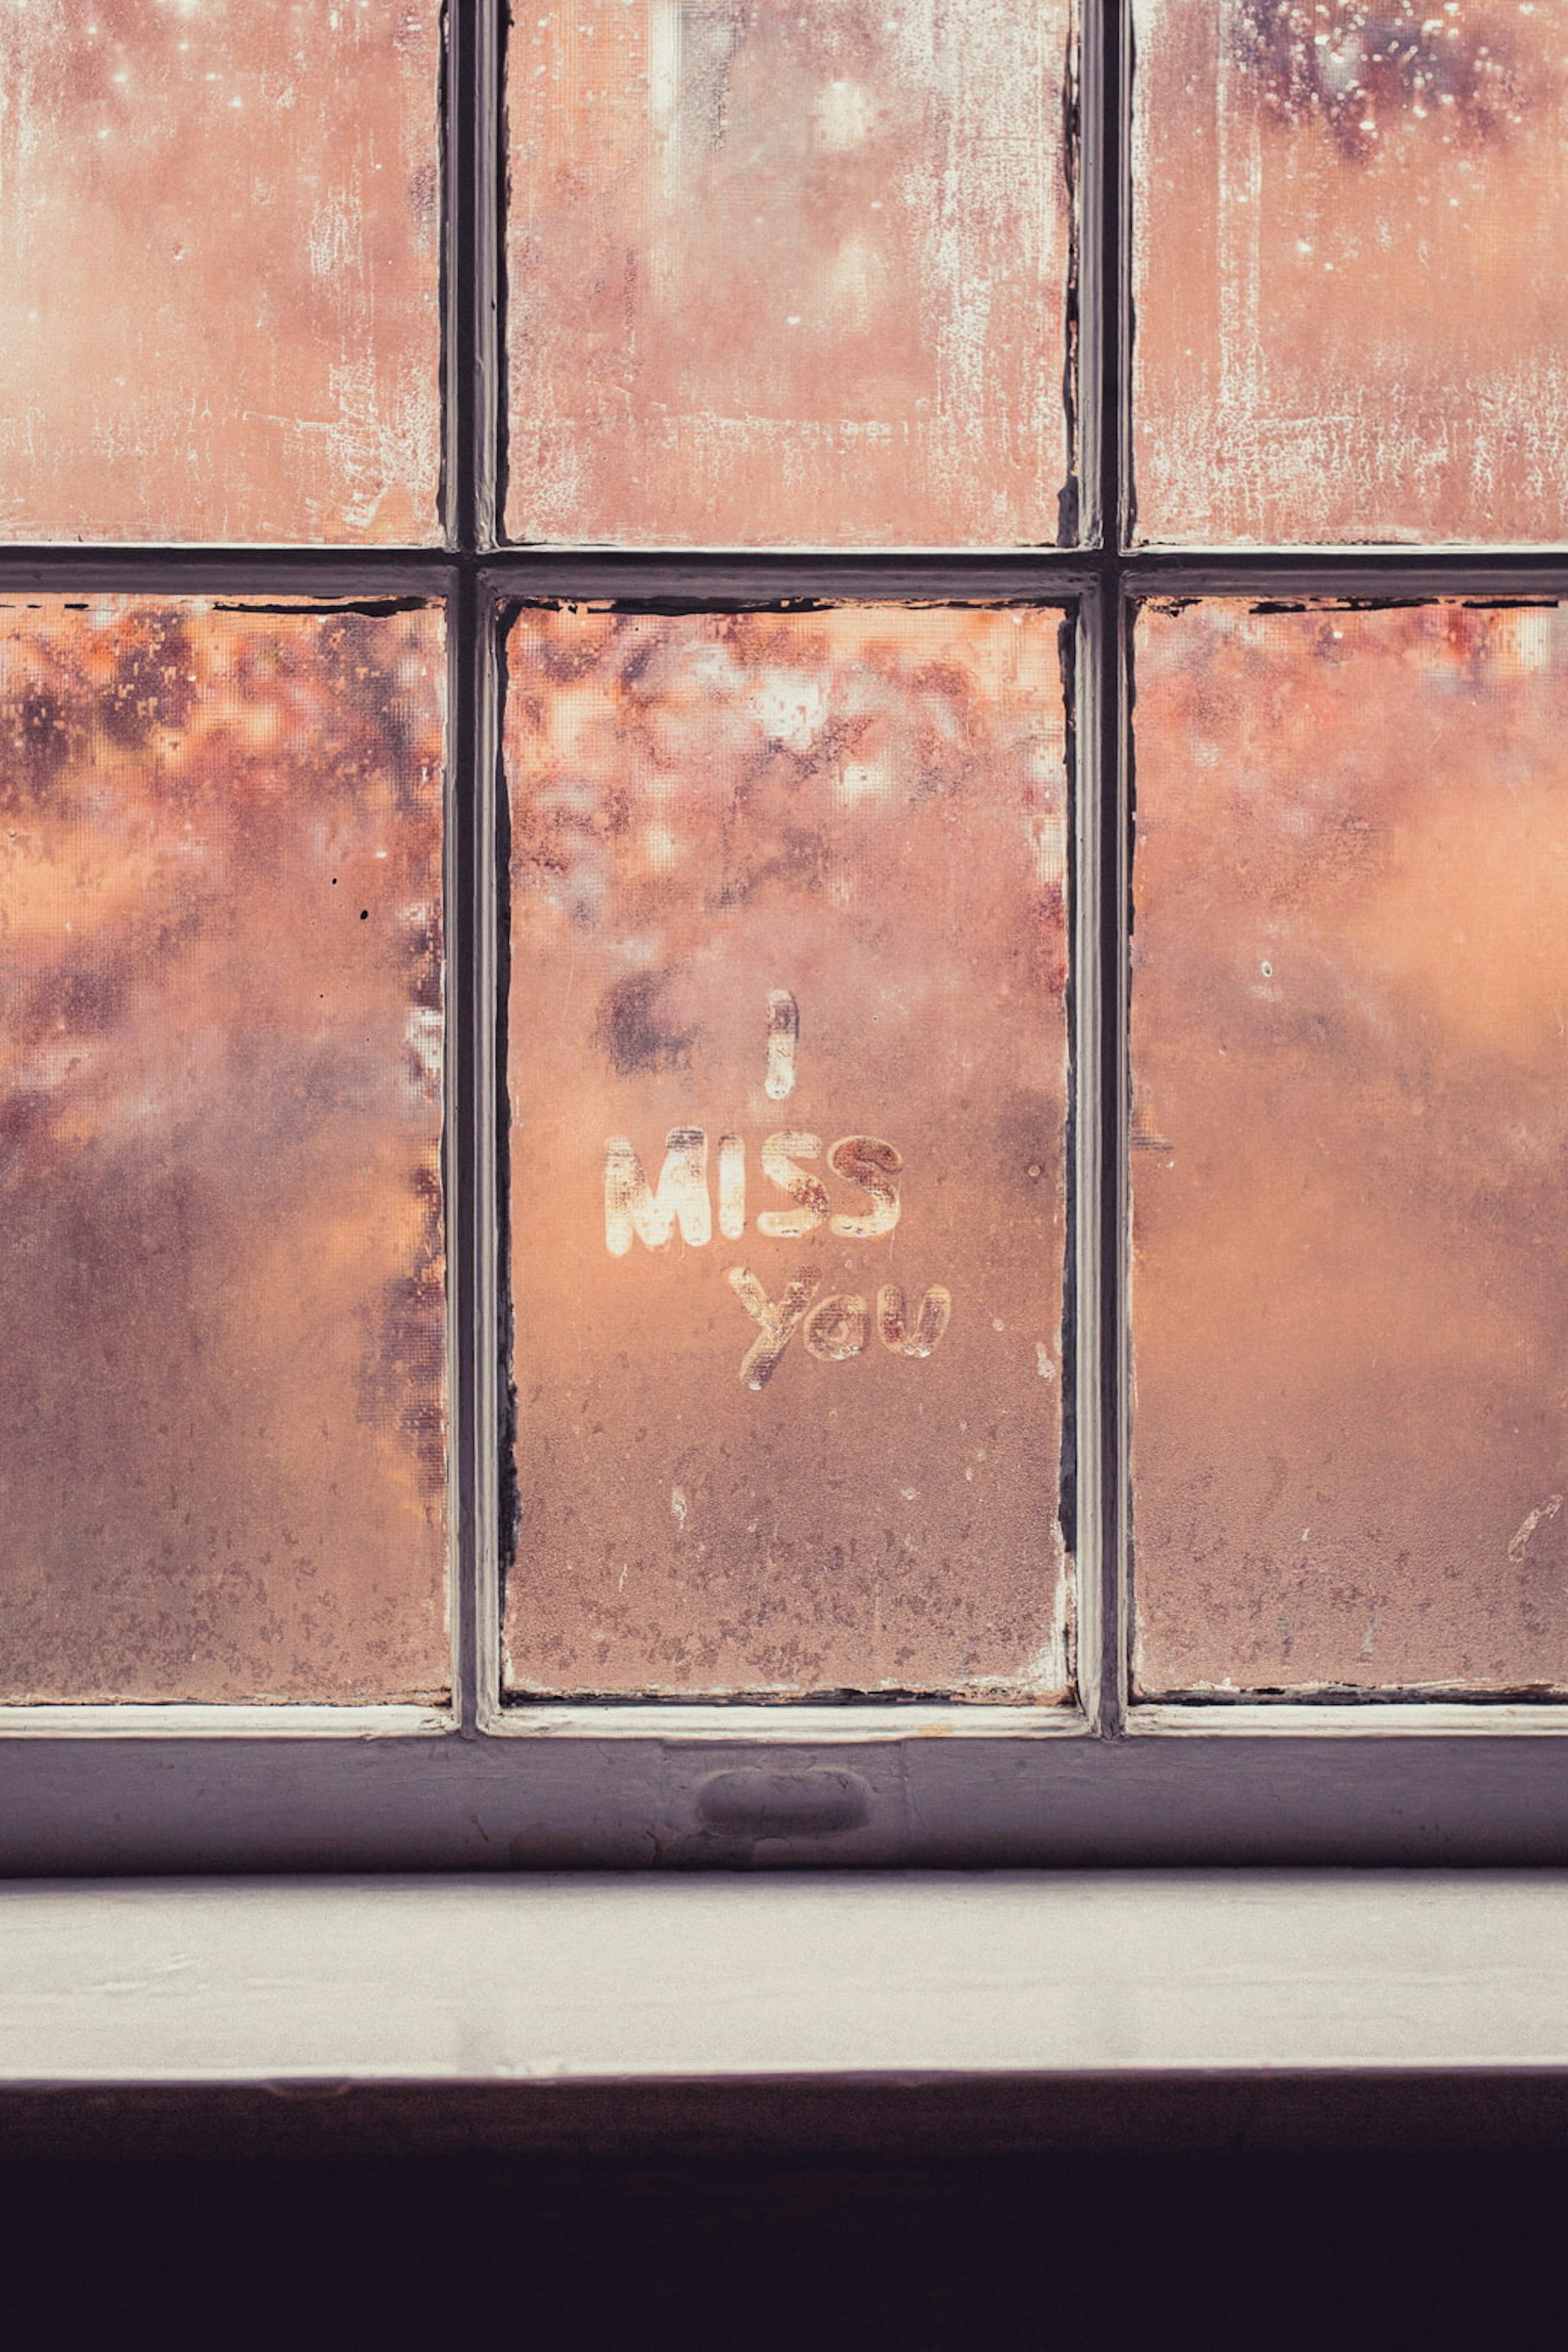 The words 'I miss you' are written in a window's condensation.